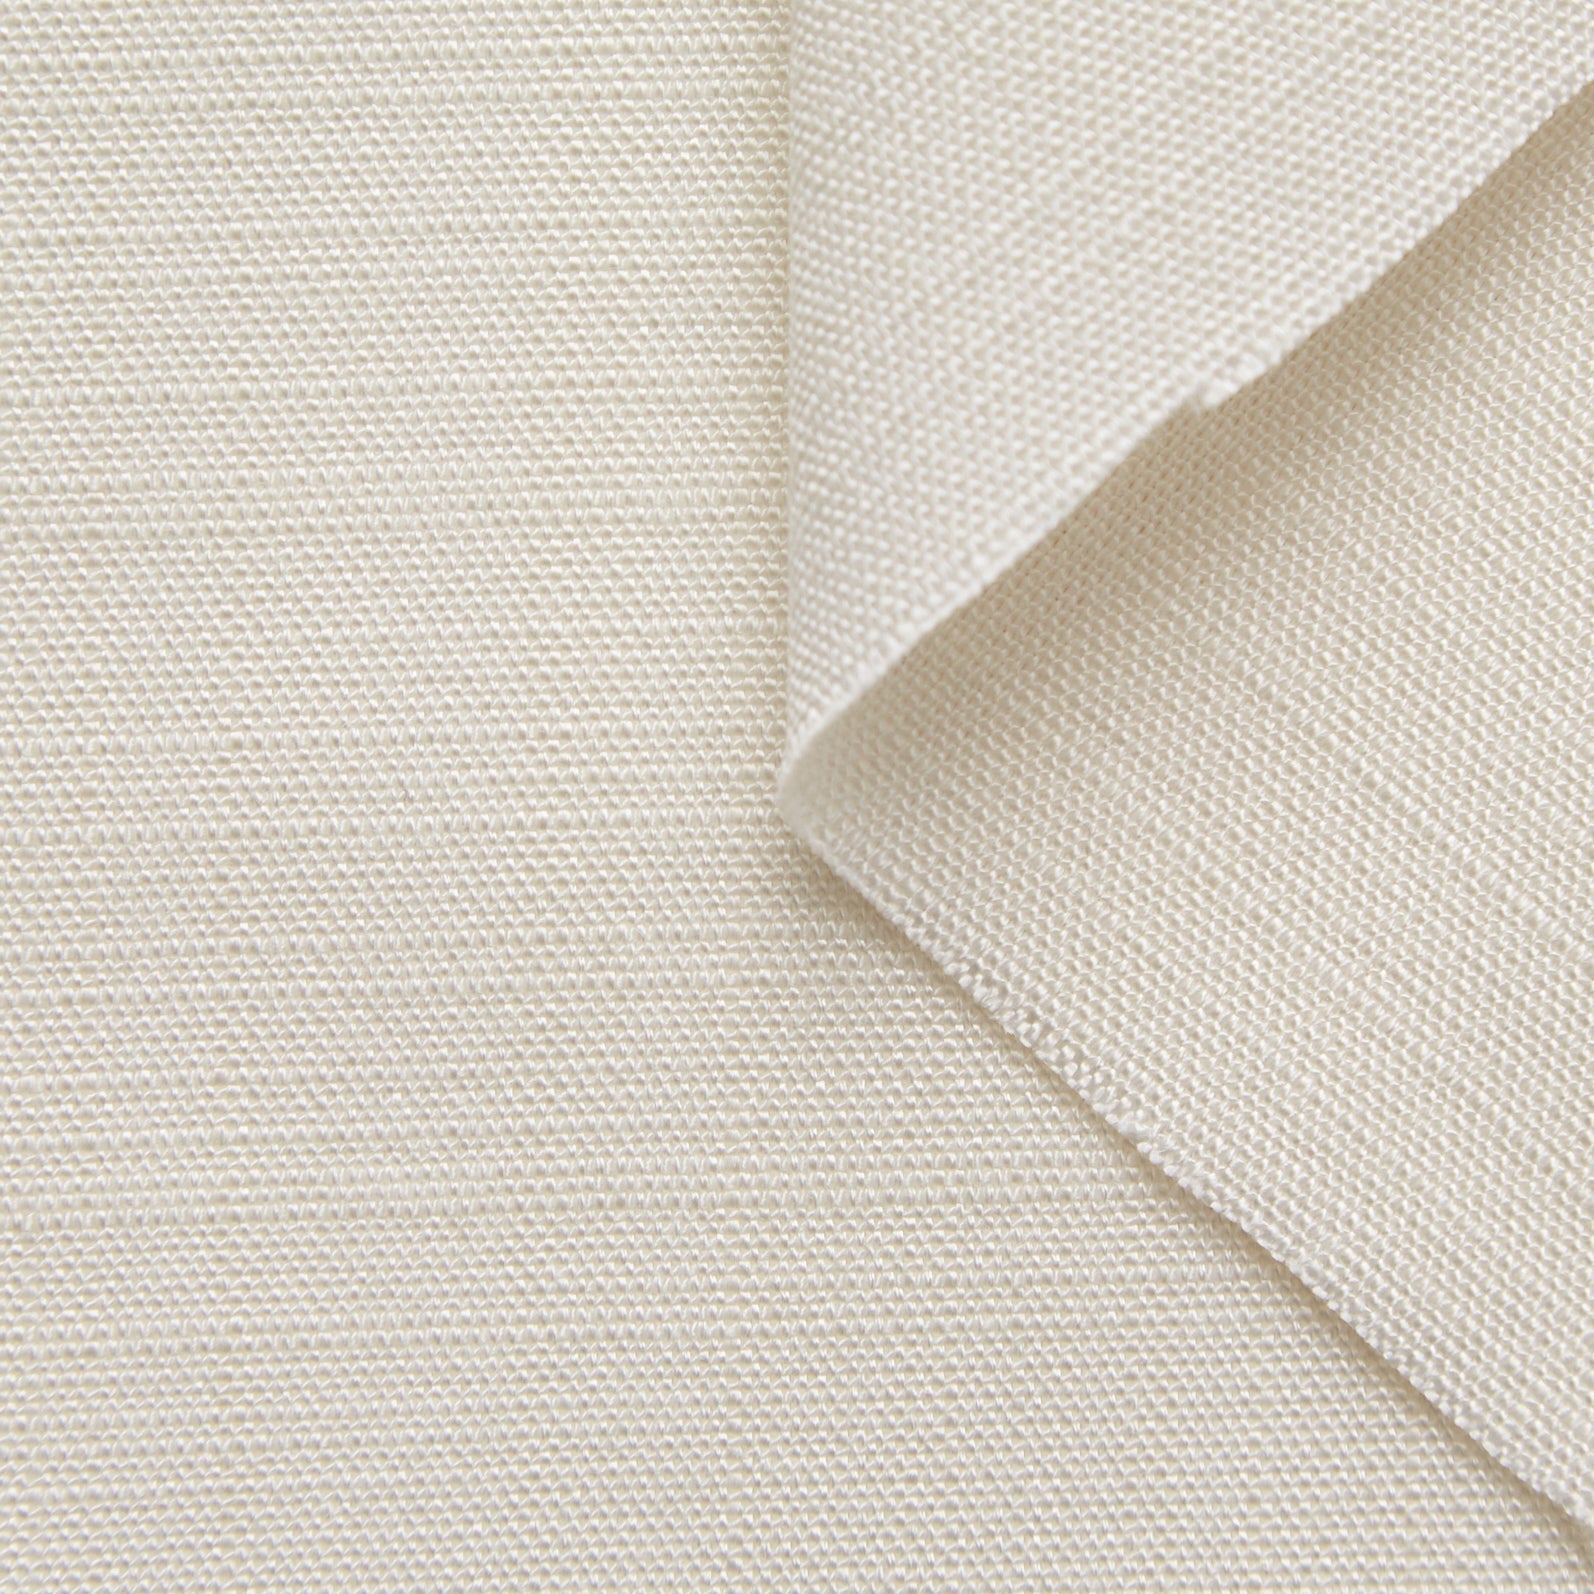 WR Coated Cotton Canvas – Nona Source